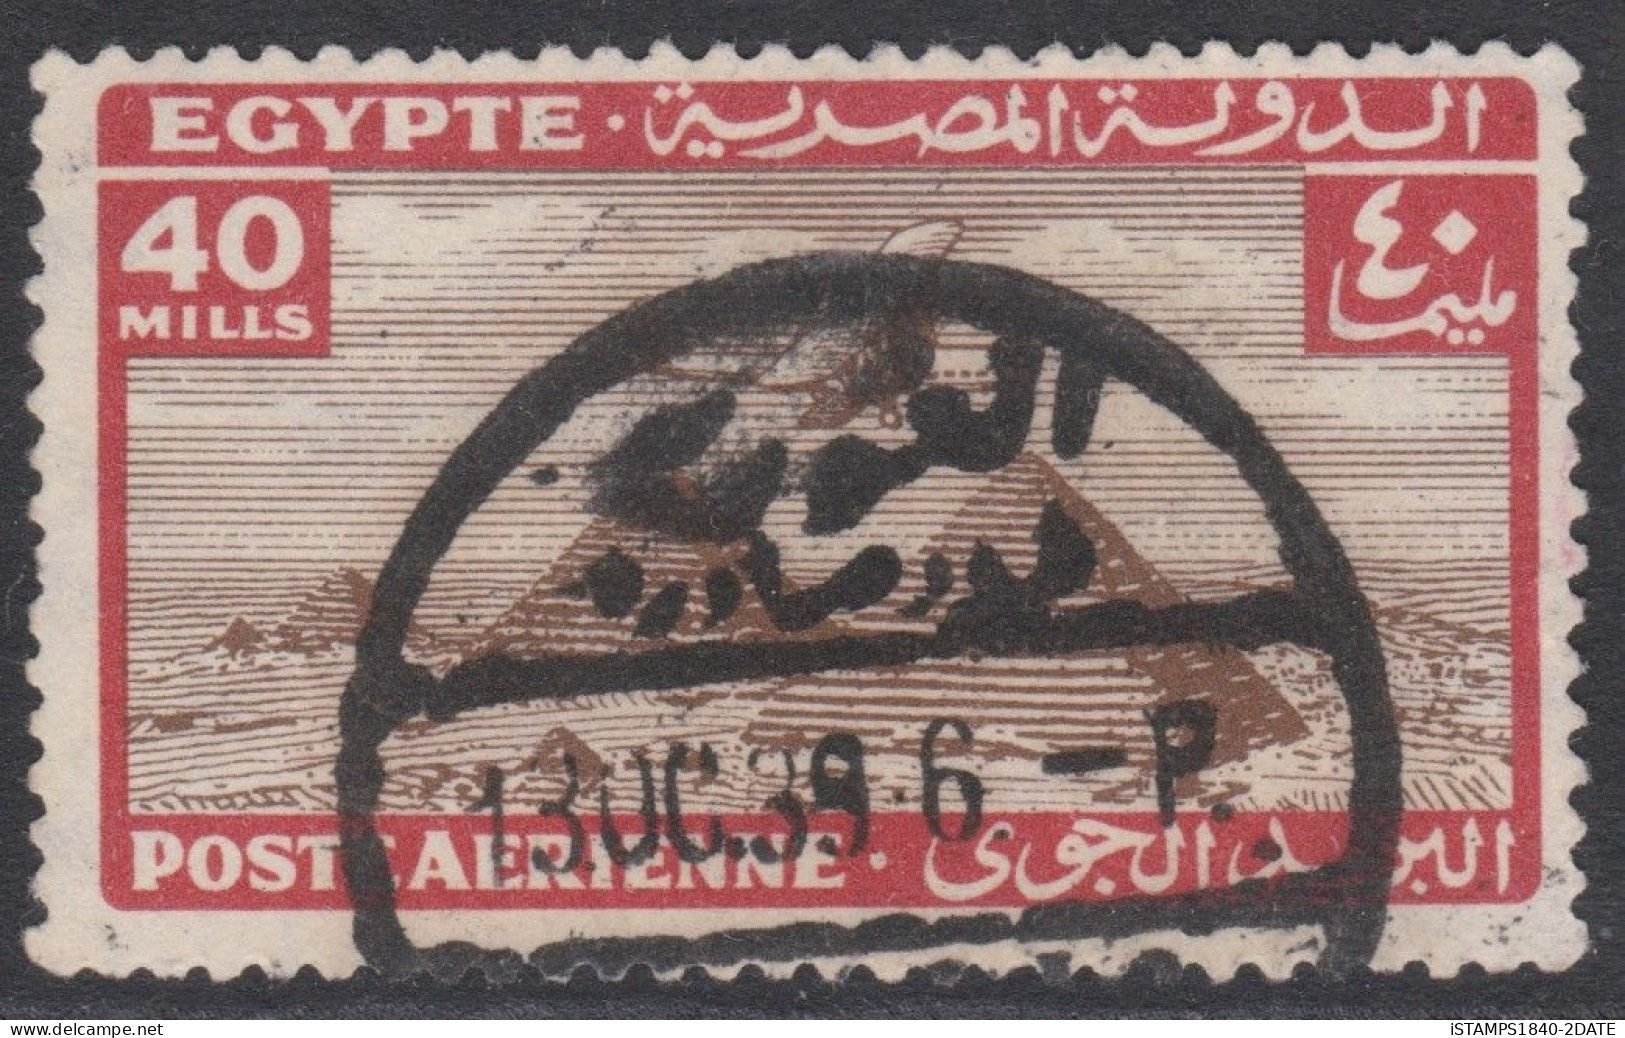 00678/ Egypt 1934/38 Air Mail 40m Used Plane Over Pyramid - Airmail